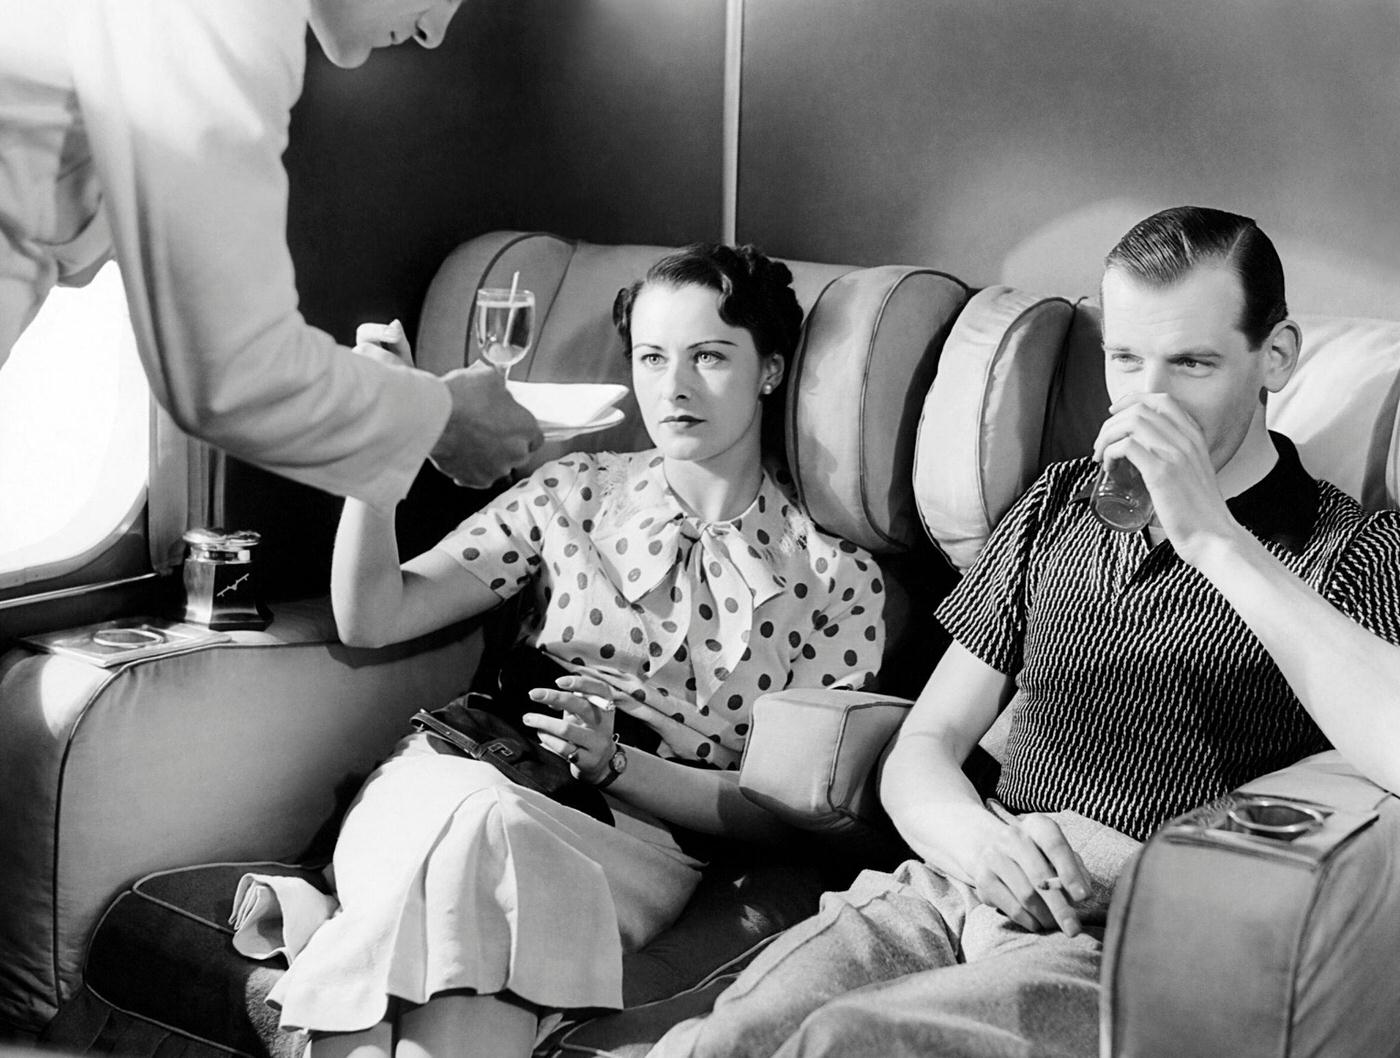 A couple enjoys cocktails in the smoking lounge of the new Imperial Airways Empire flying boat passenger plane in London, 1930